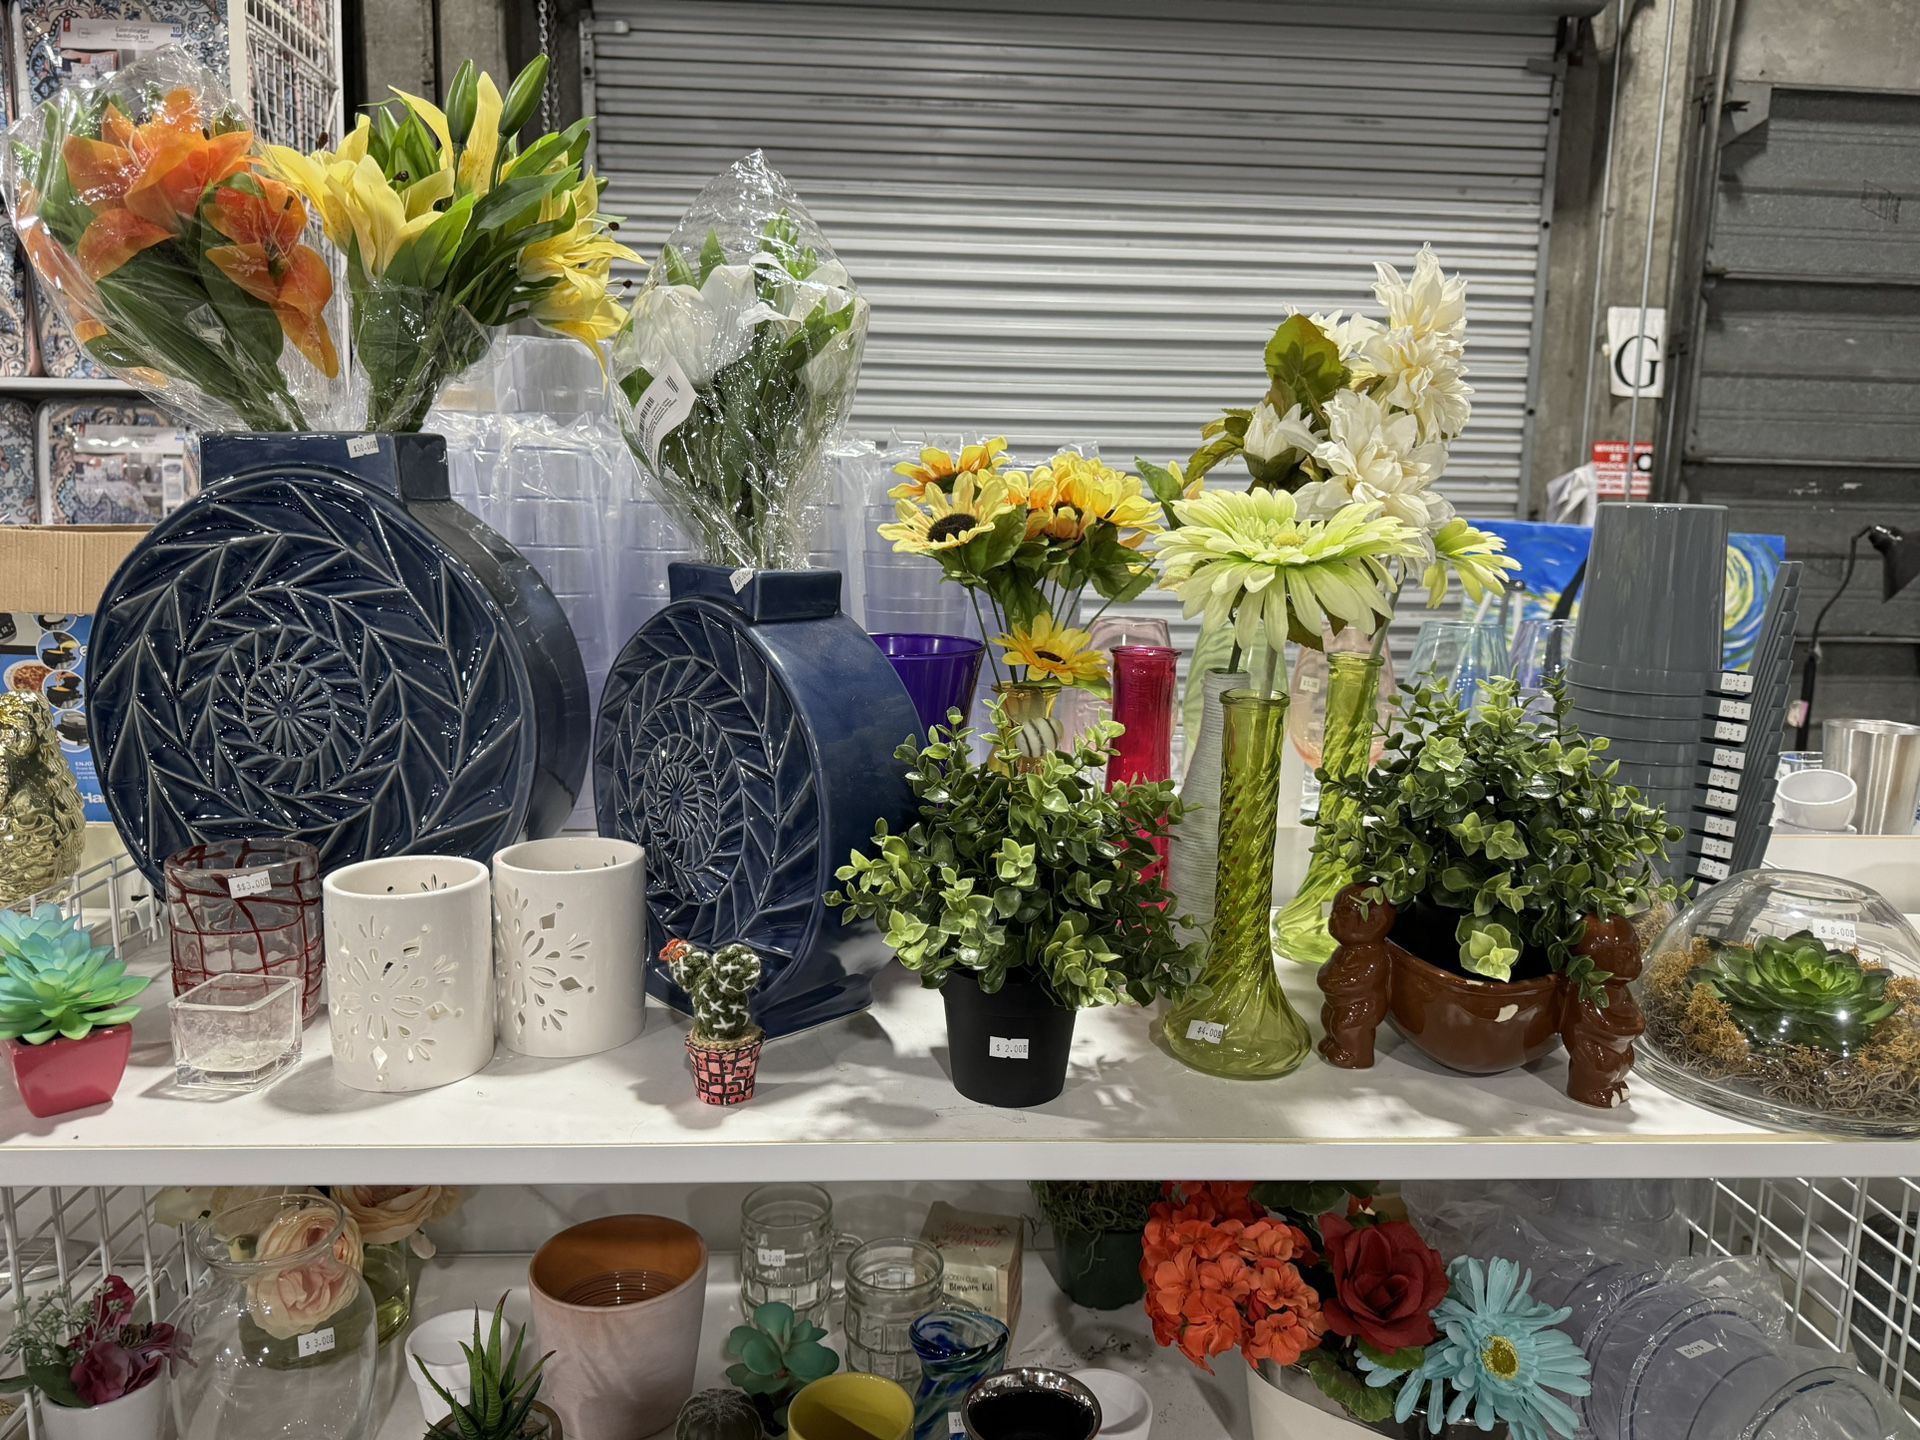 Vases And Flowers 